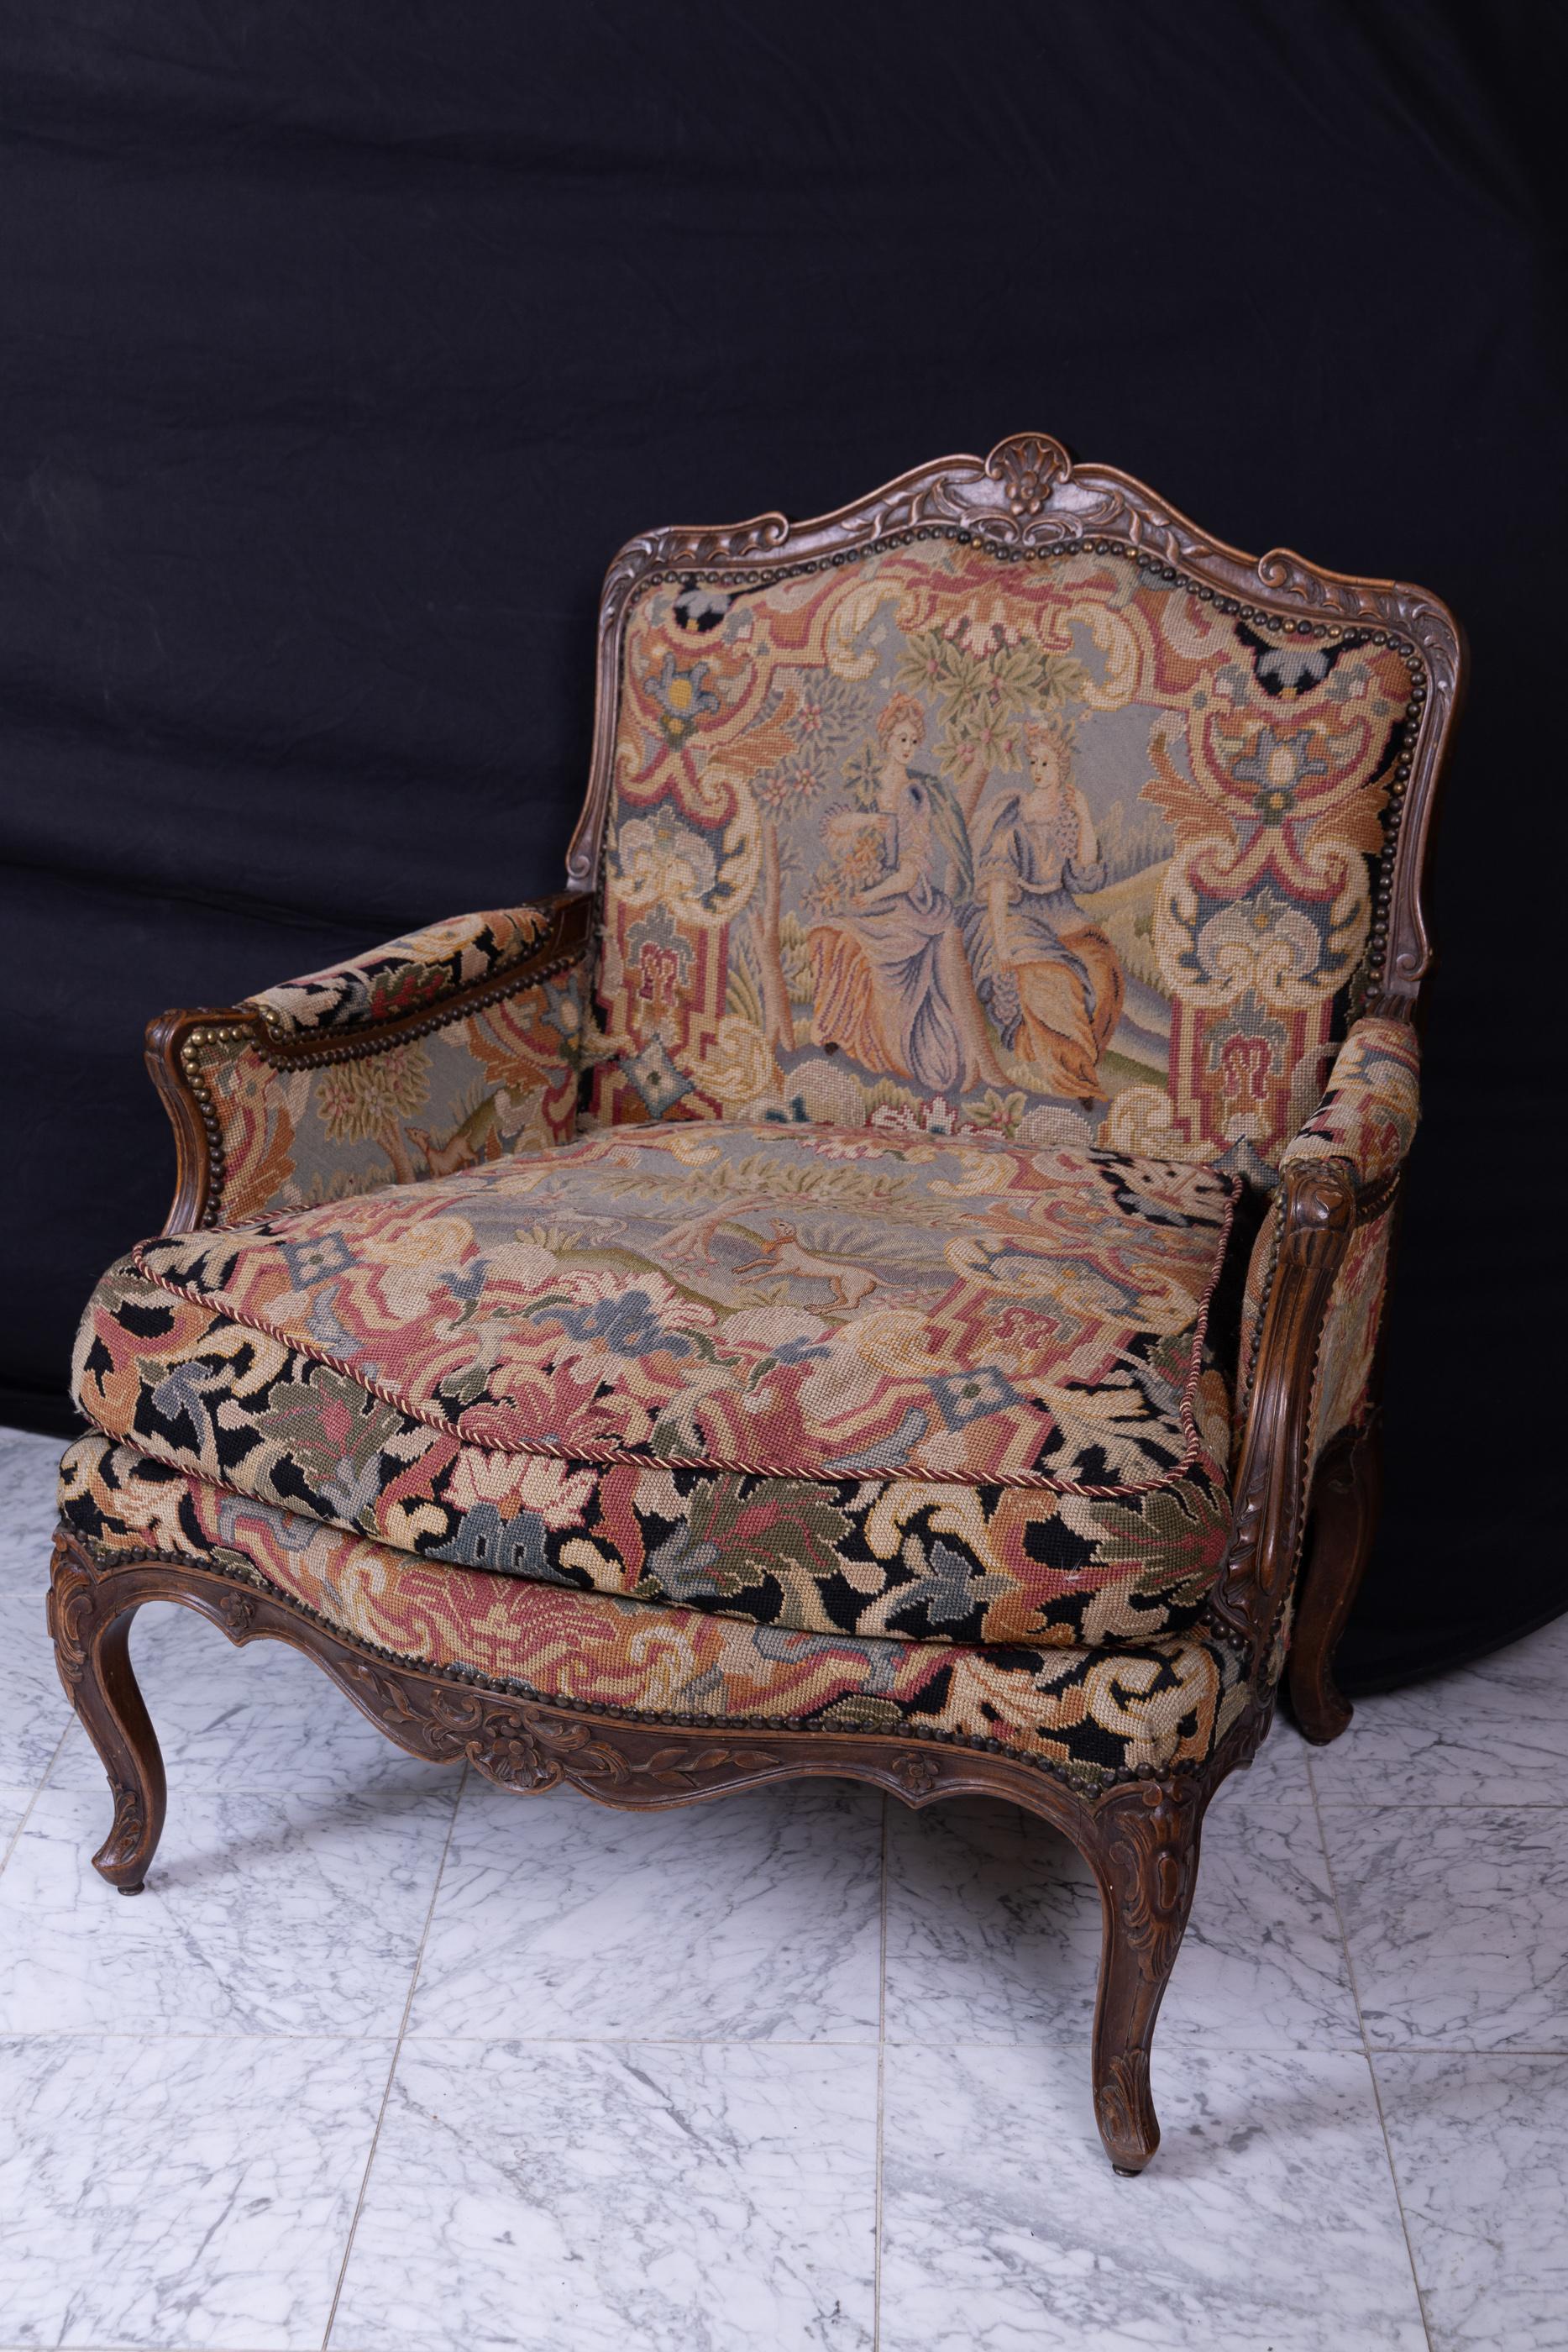 Grand pair of French 18th century Louis XV walnut bergeres, heavily carved on top, arms, apron, and legs; upholstered in the original needlepoint upholstery on the back, sides, the front above the apron, and the cushions. 
